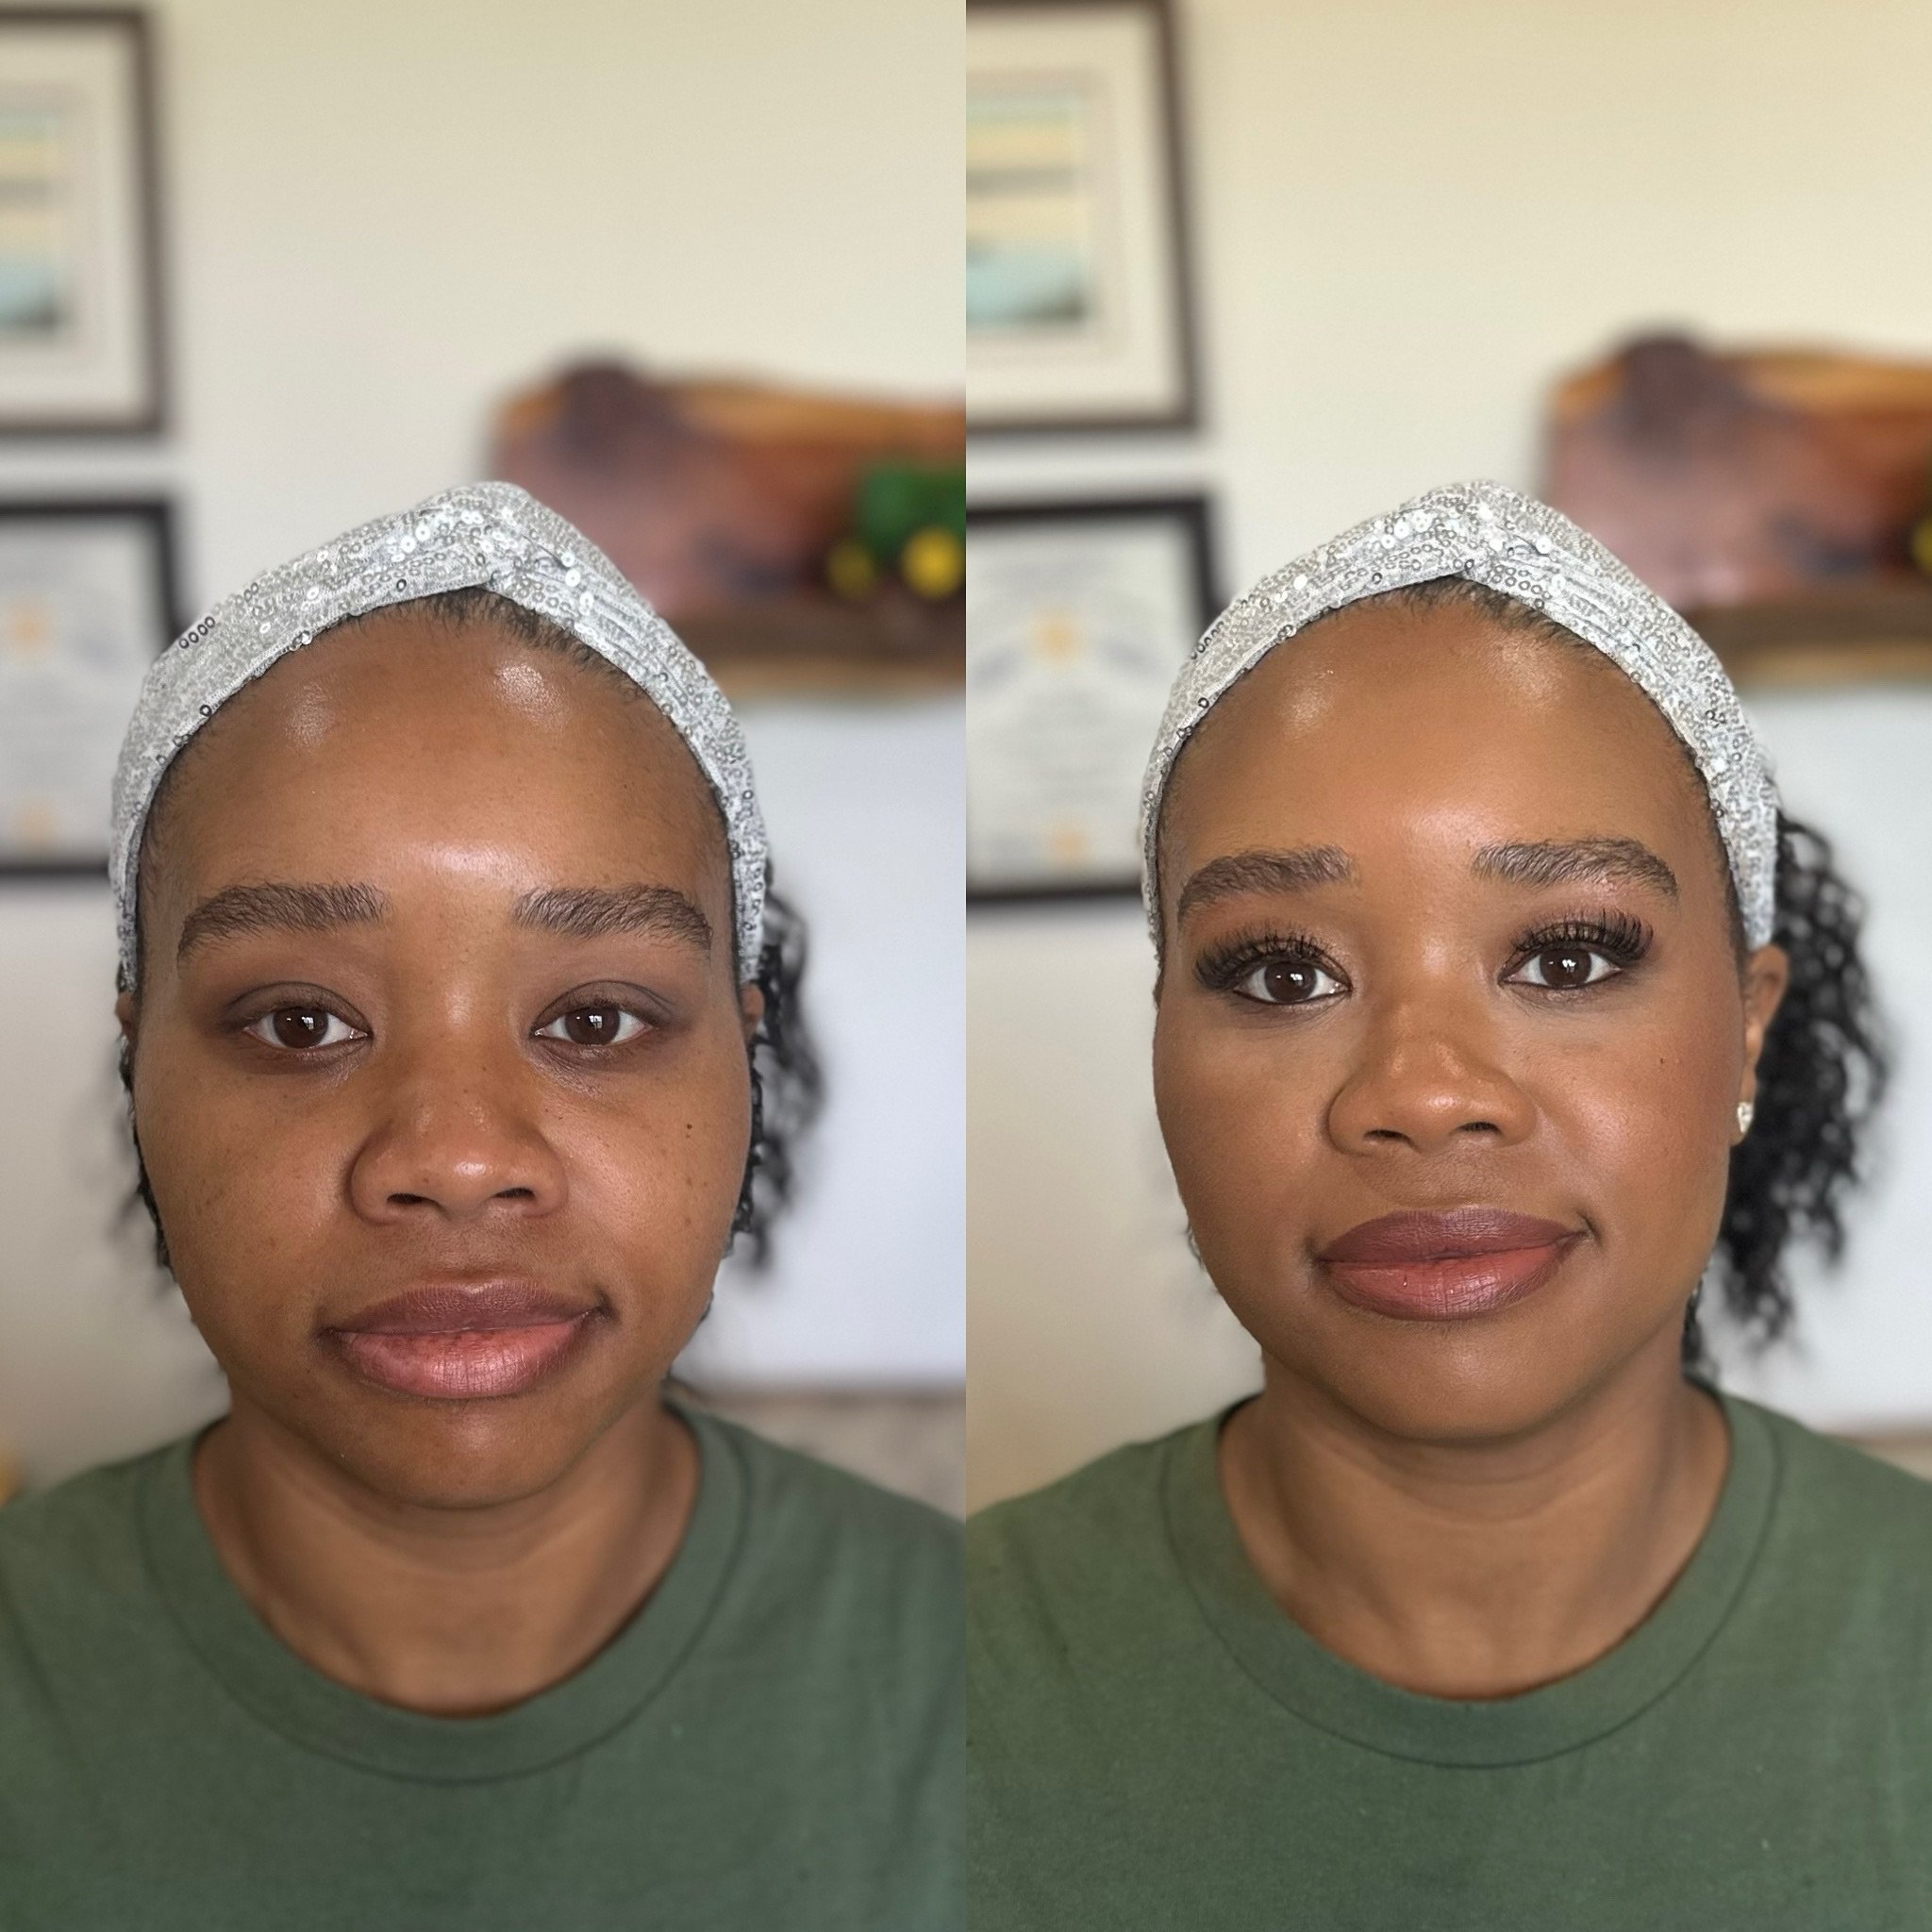 Before &amp; After from today&rsquo;s wedding ❤️ Loved her look, she had never worn false lashes but was open trying them.  At end she loved them and could barely feel them.